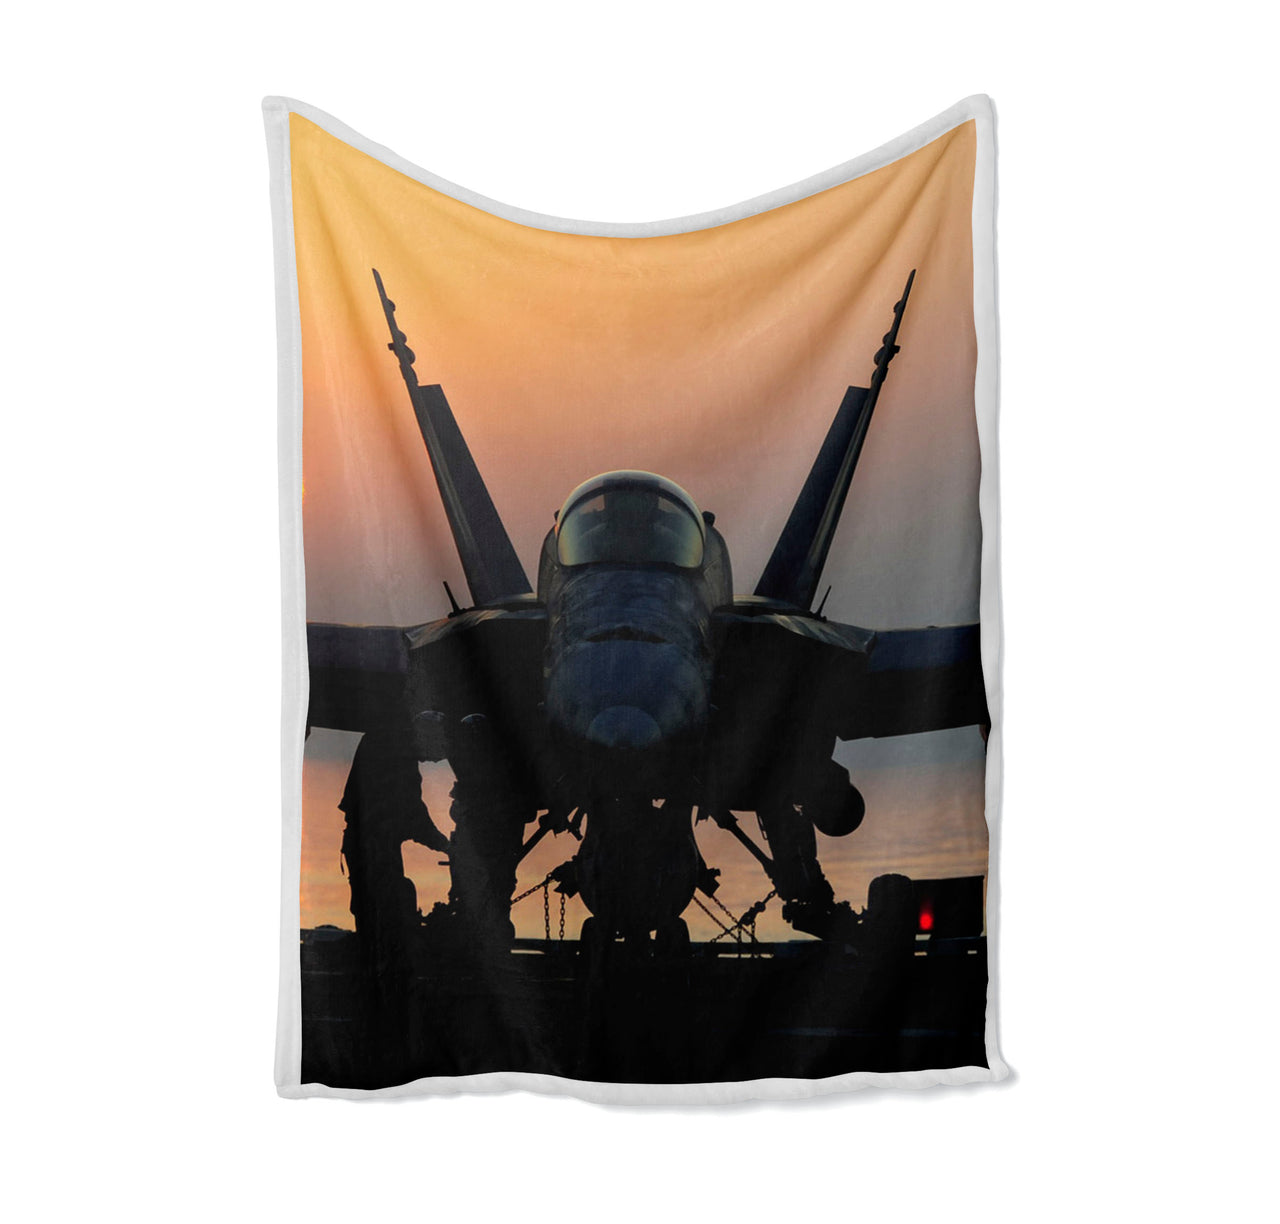 Military Jet During Sunset Designed Bed Blankets & Covers